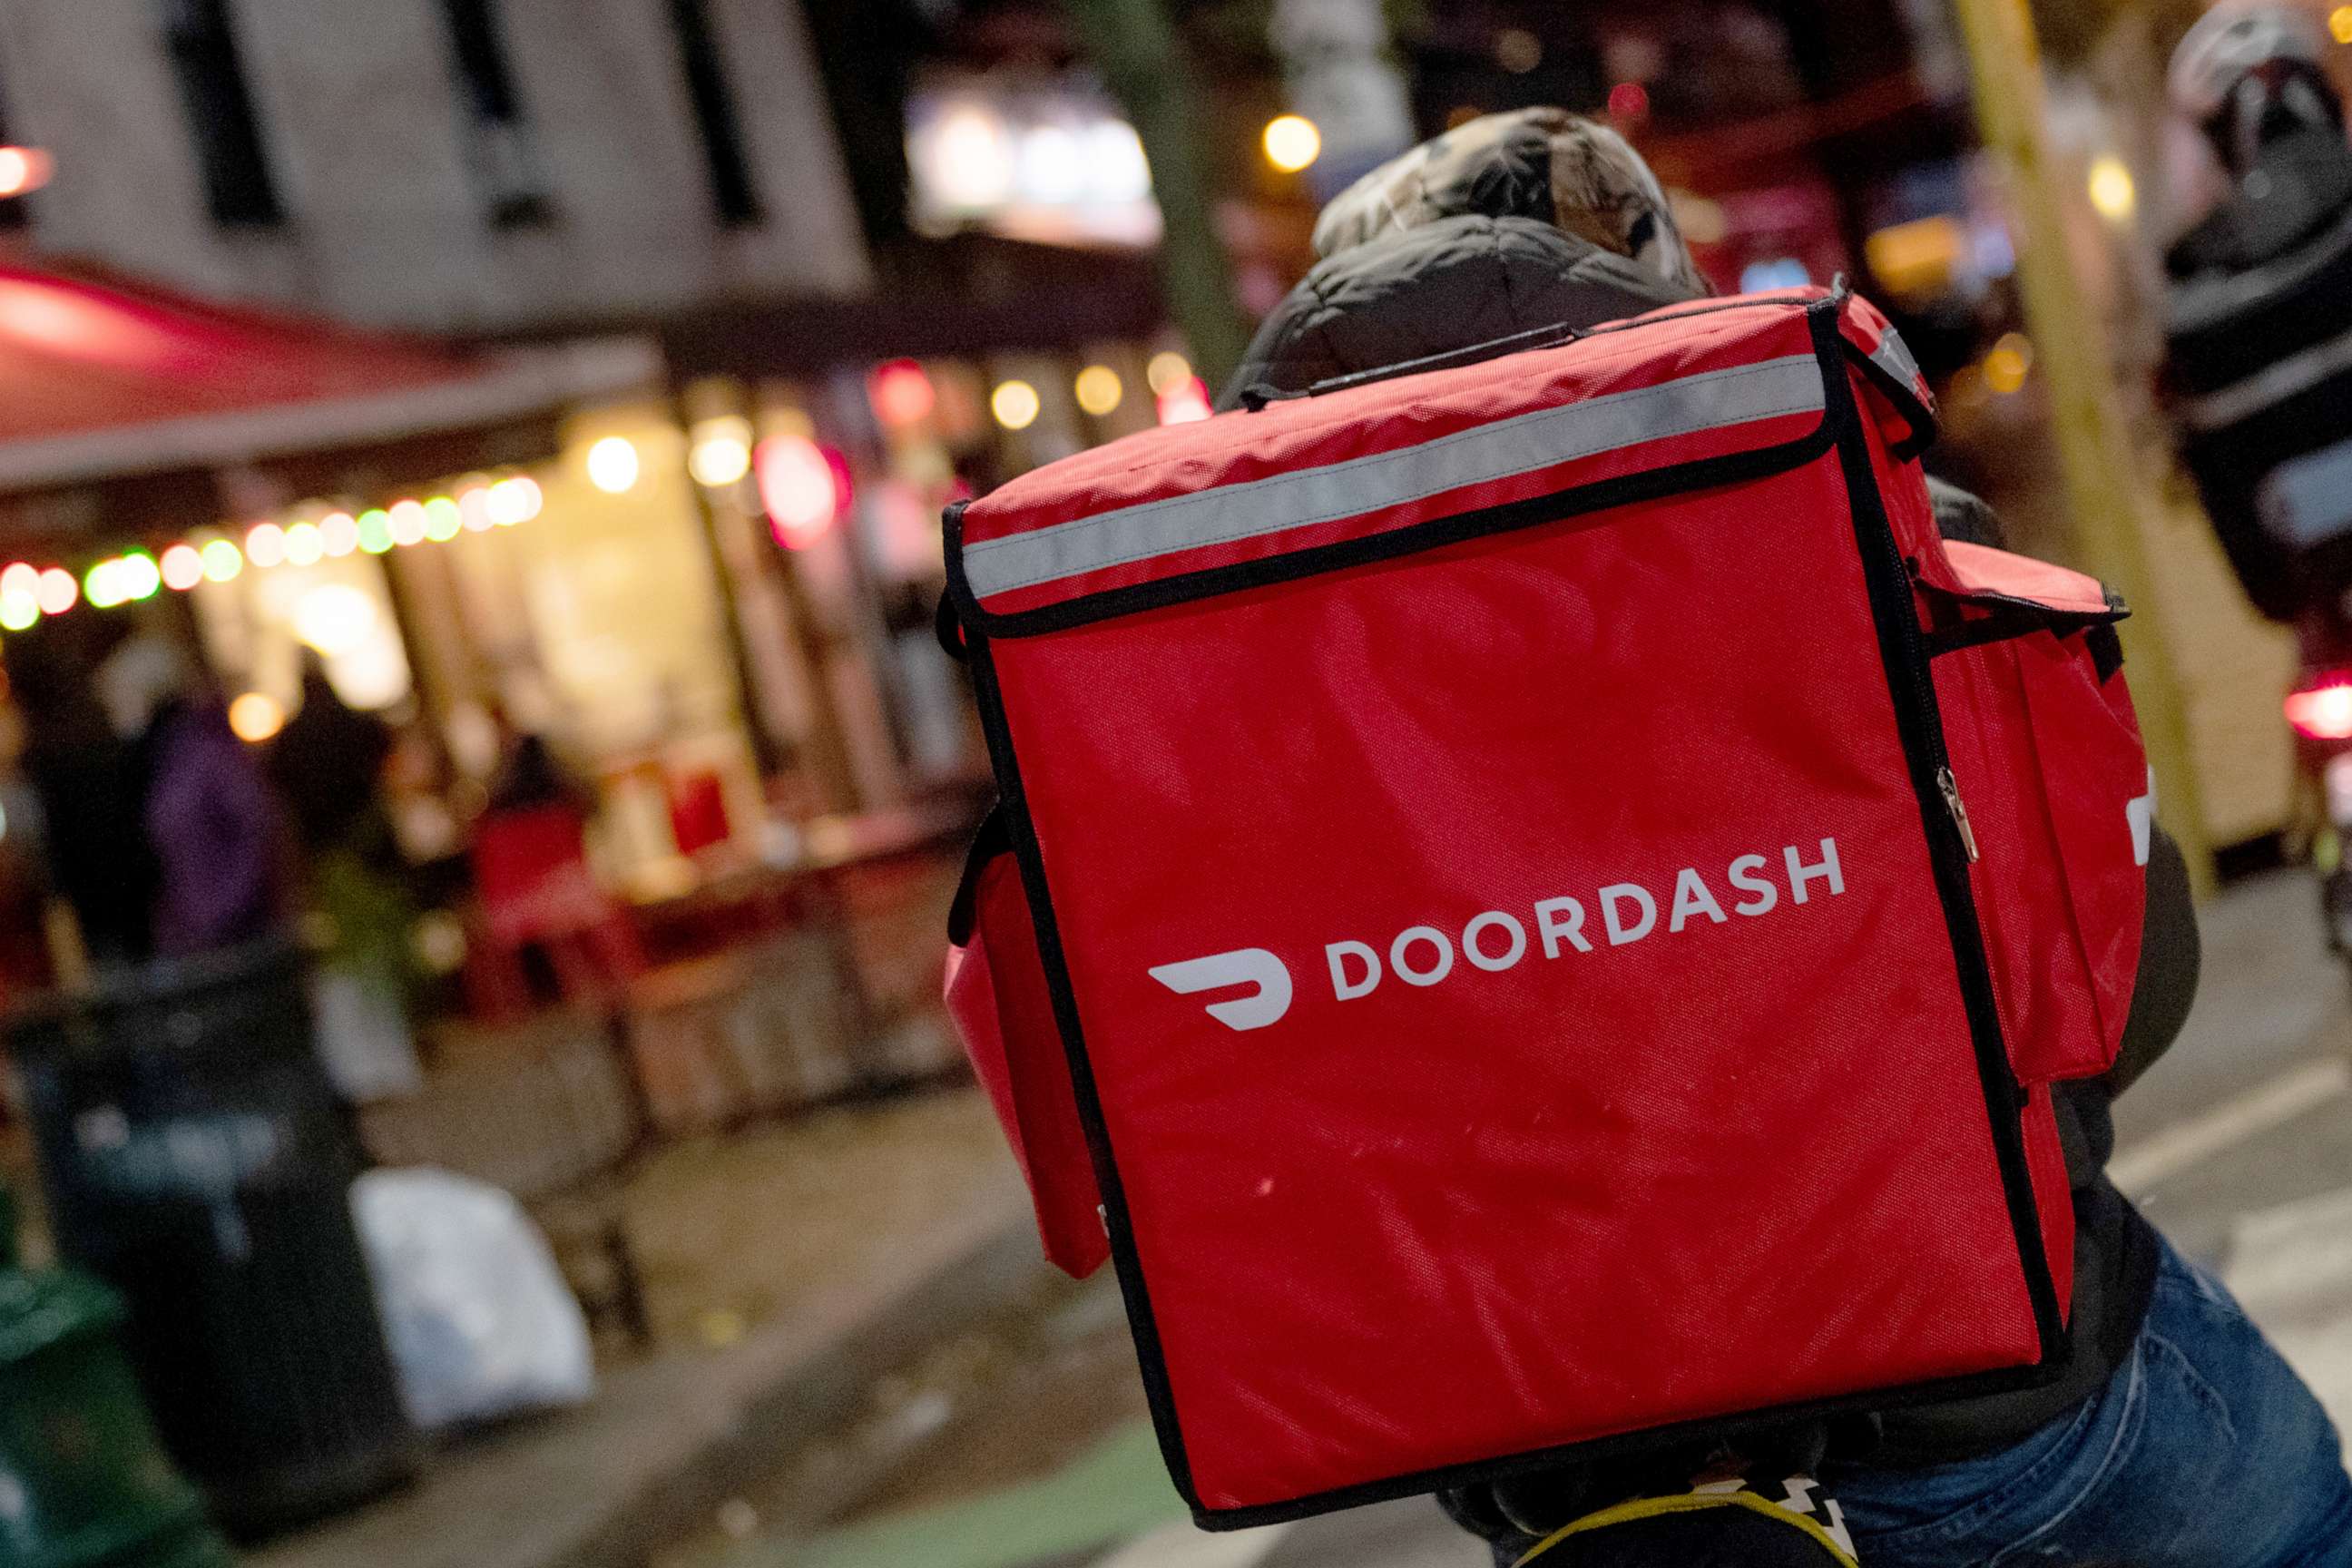 Food Delivery App DoorDash Changes Controversial Tipping Policy - Eater